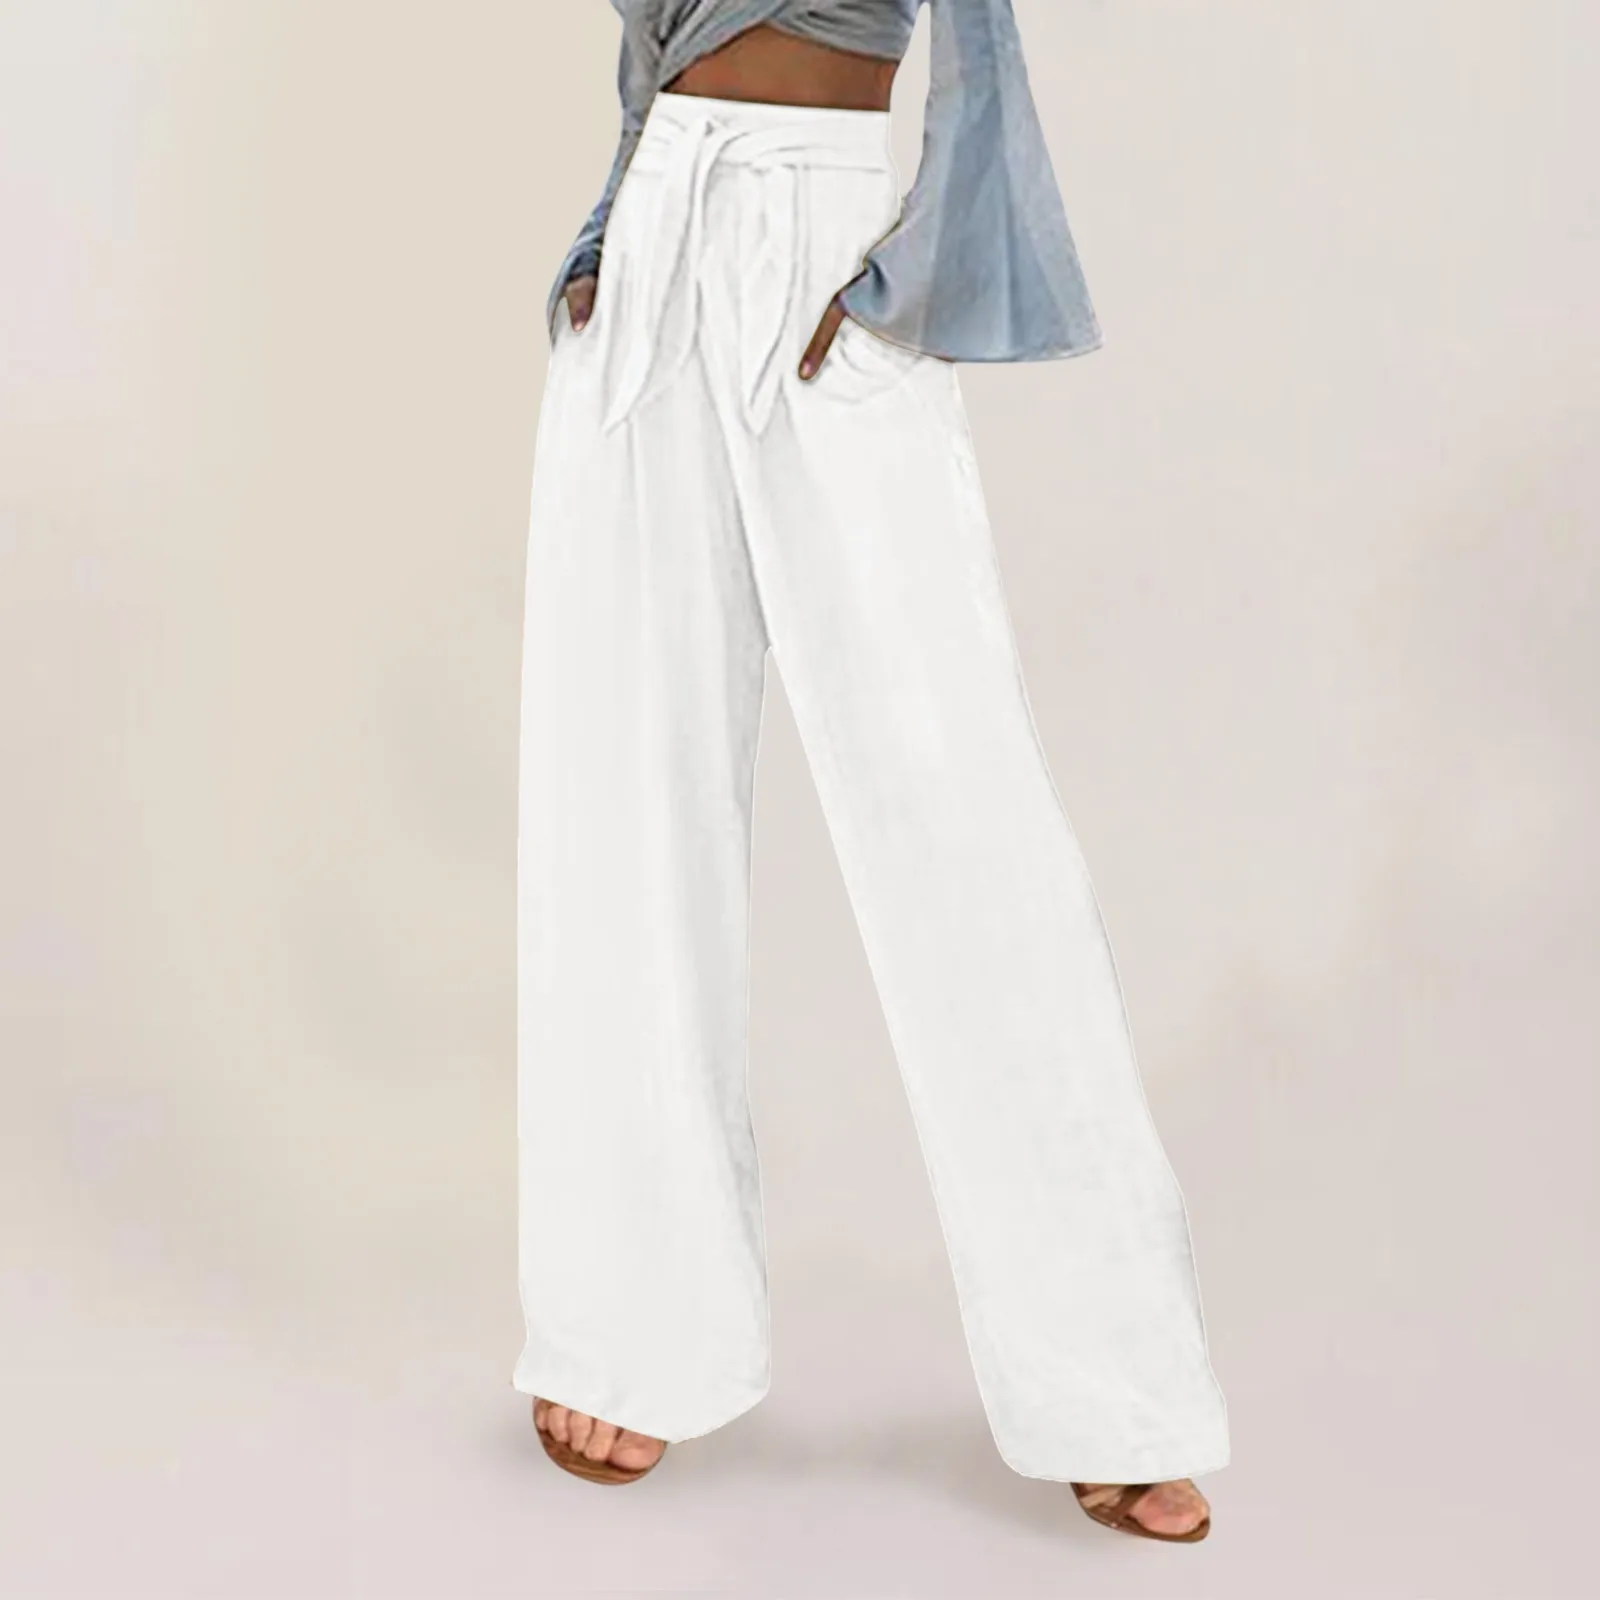 Streetwear Cotton Linen Pants For Women Solid Color High Waist Wide Leg Trousers With Pockets Elastic Belt Loose Casual Pants